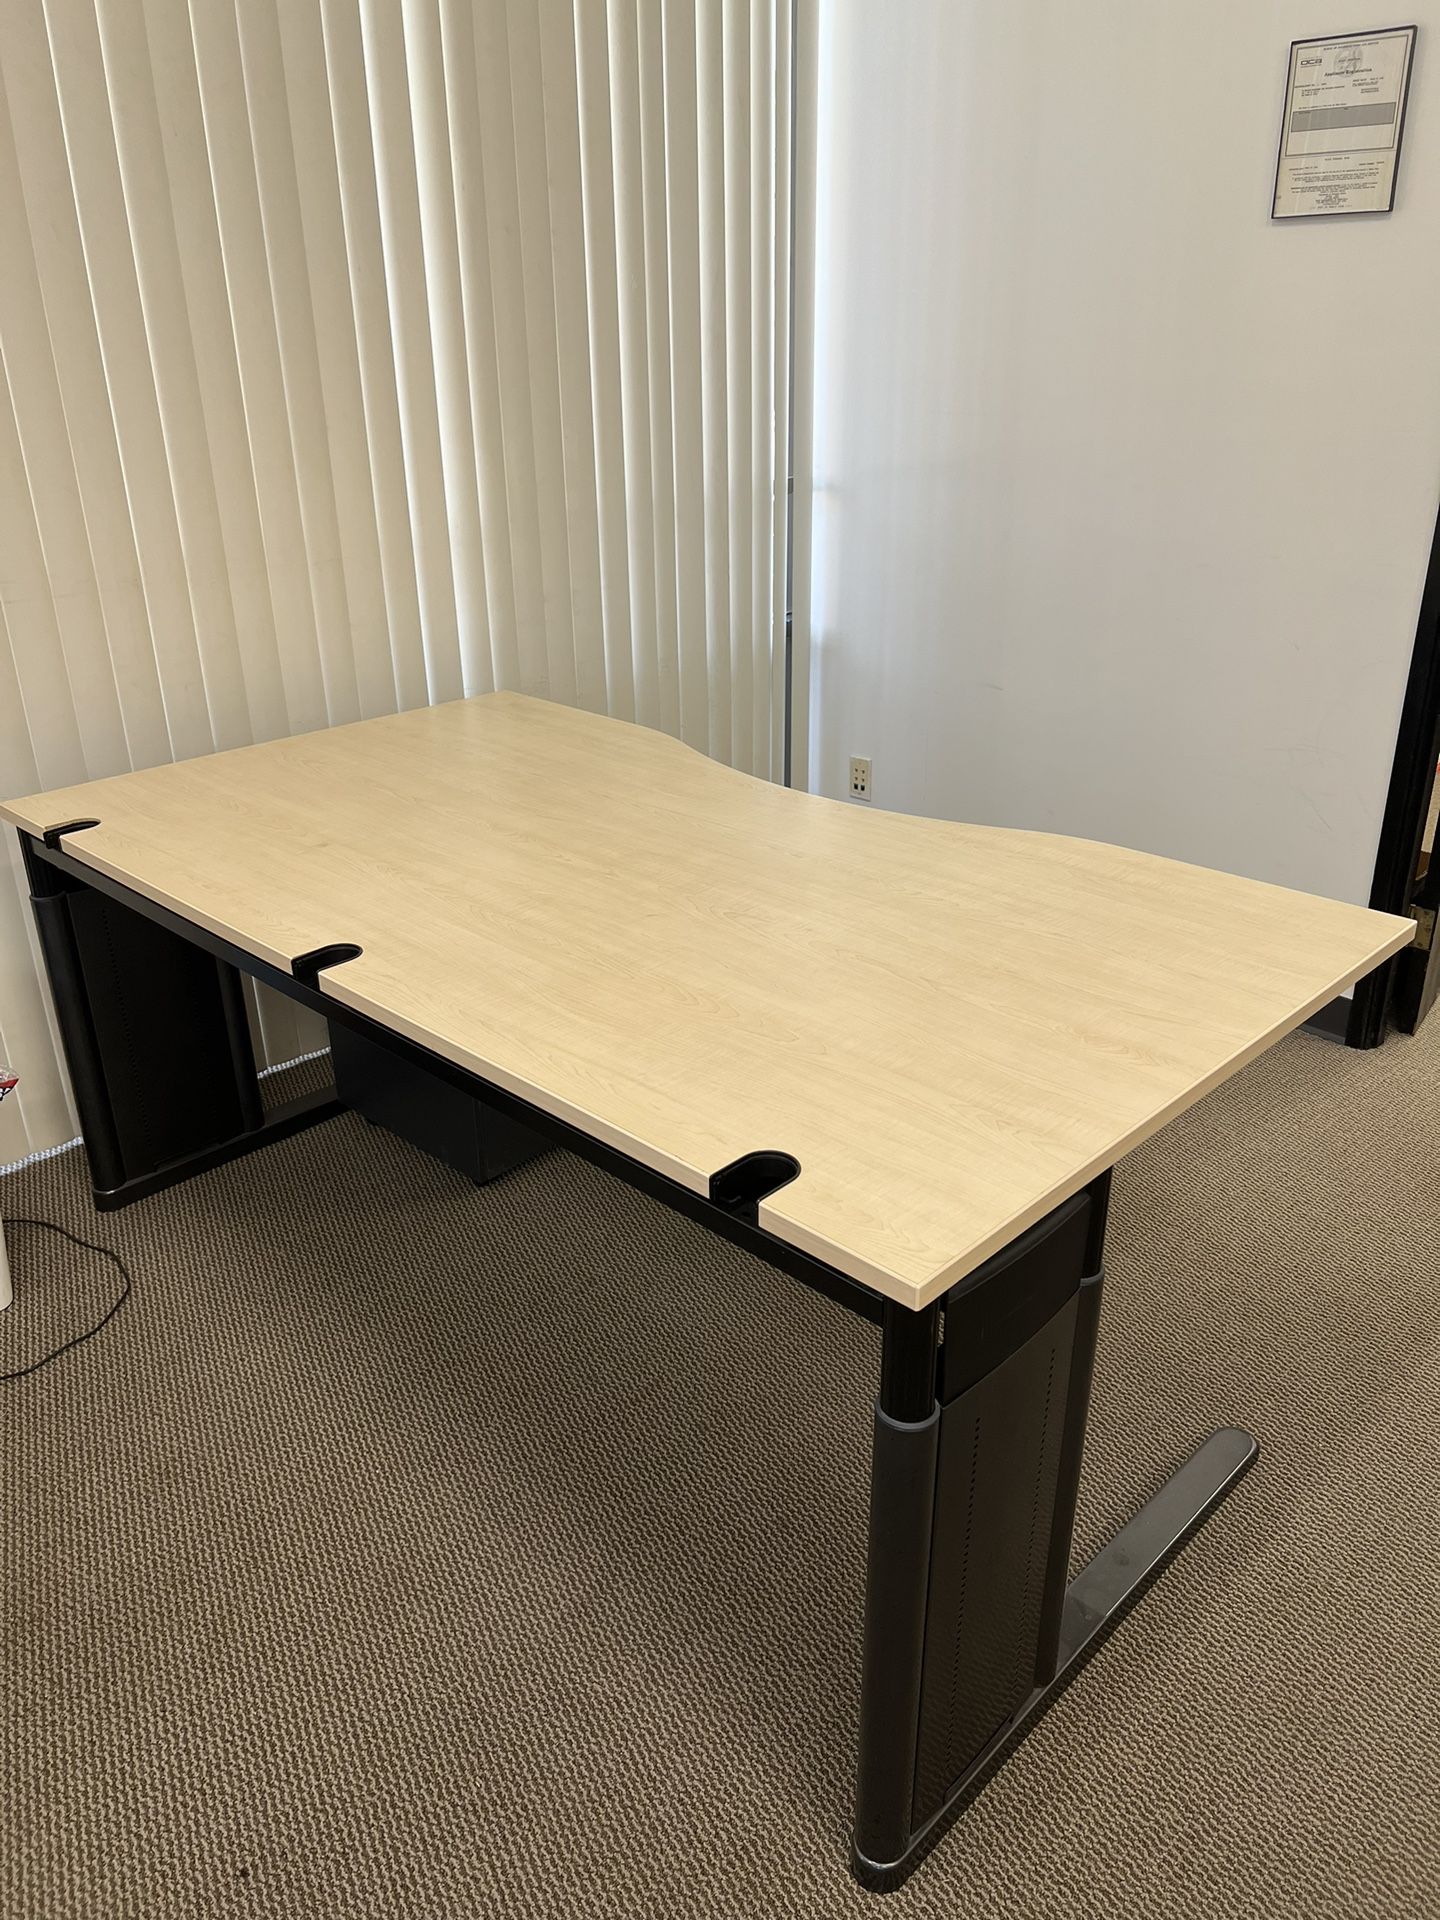 High Quality Office Furniture For Sale